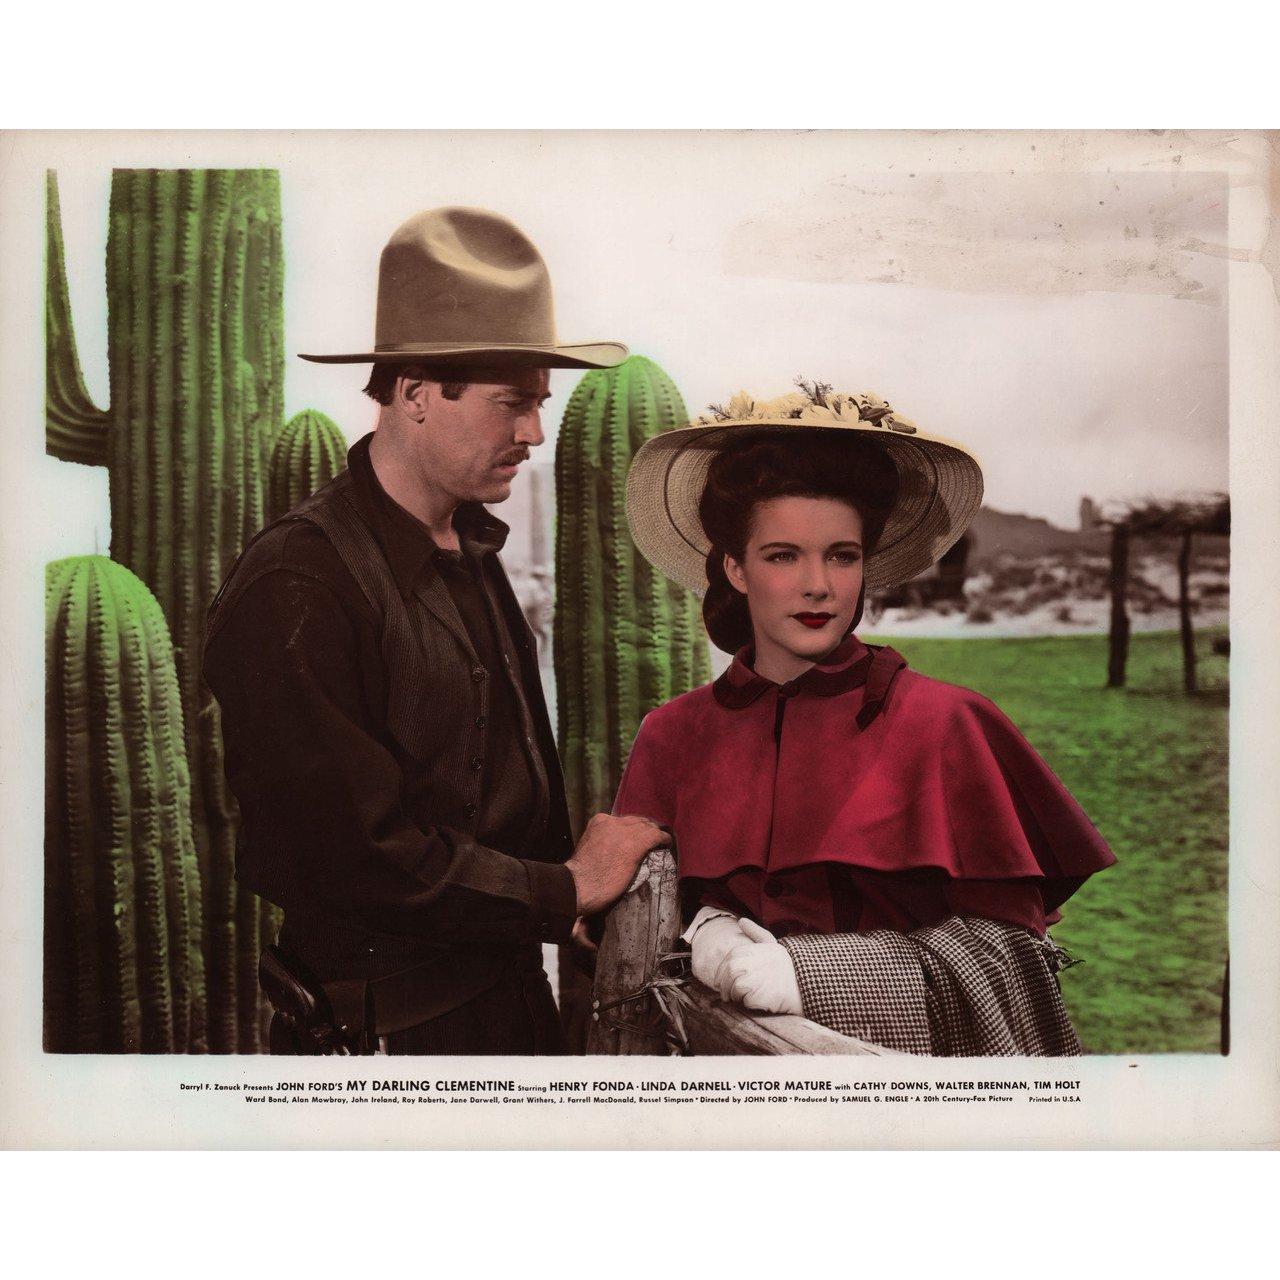 Original 1946 U.S. color photo for the film “My Darling Clementine” directed by John Ford with Henry Fonda / Linda Darnell / Victor Mature / Cathy Downs. Very good-fine condition. Please note: the size is stated in inches and the actual size can